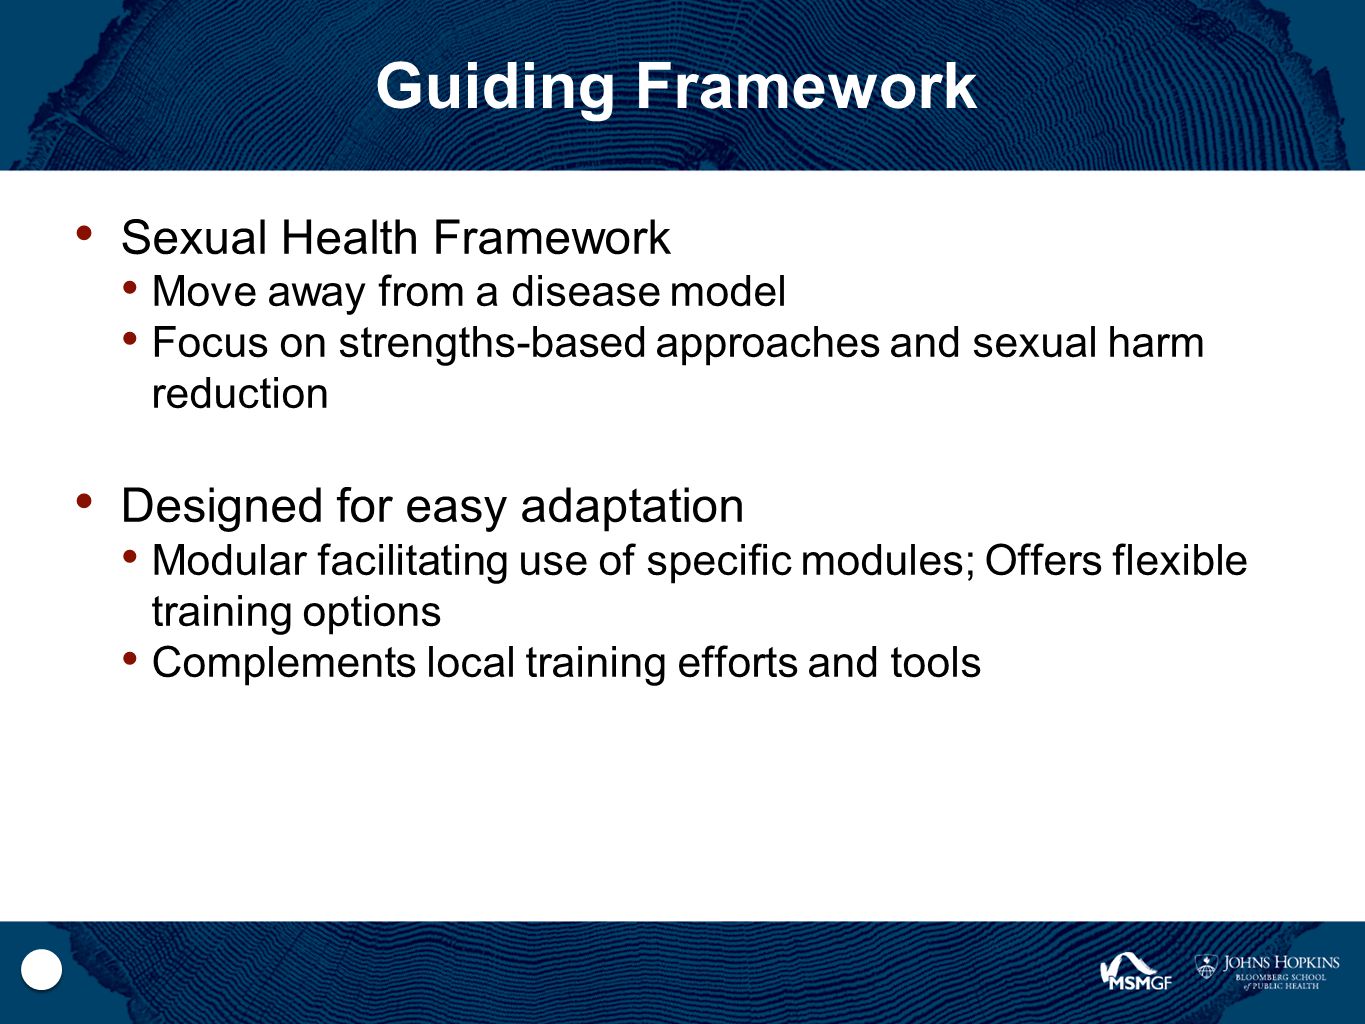 Guiding Framework Sexual Health Framework Move away from a disease model Focus on strengths-based approaches and sexual harm reduction Designed for easy adaptation Modular facilitating use of specific modules; Offers flexible training options Complements local training efforts and tools